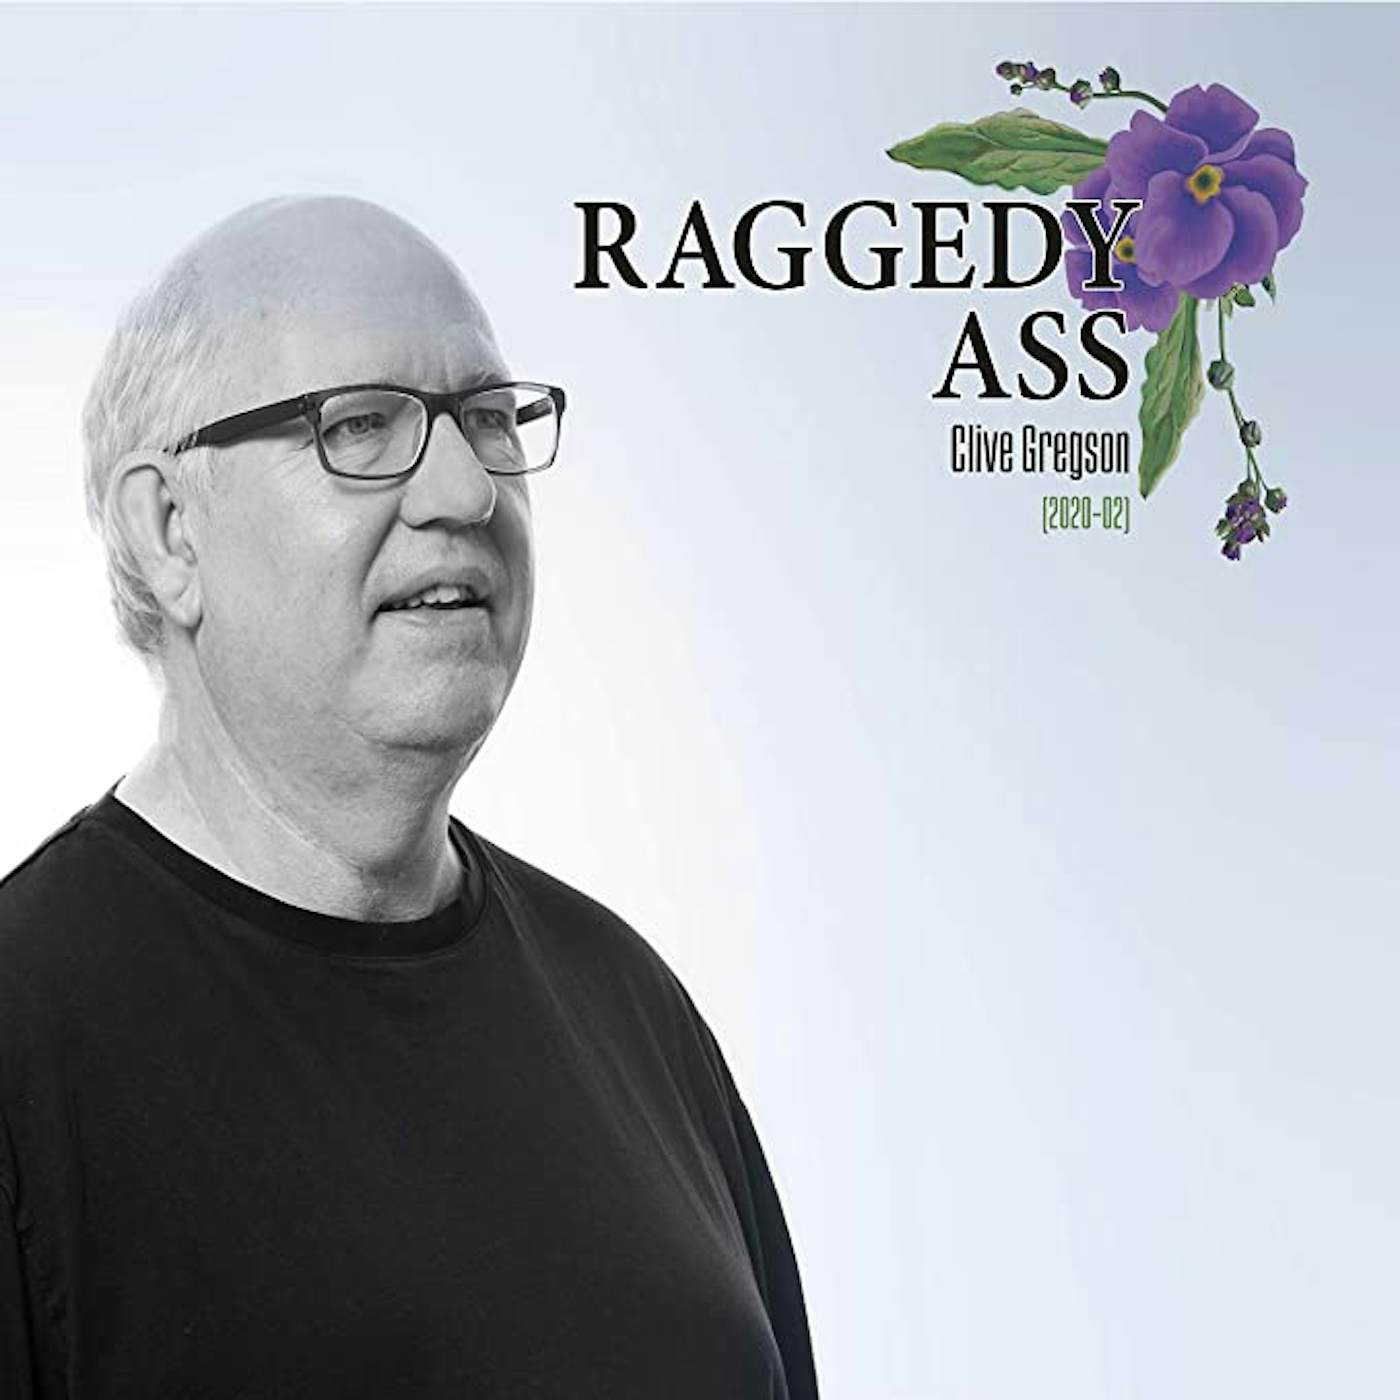 Clive Gregson RAGGEDY ASS (2020-02) CD